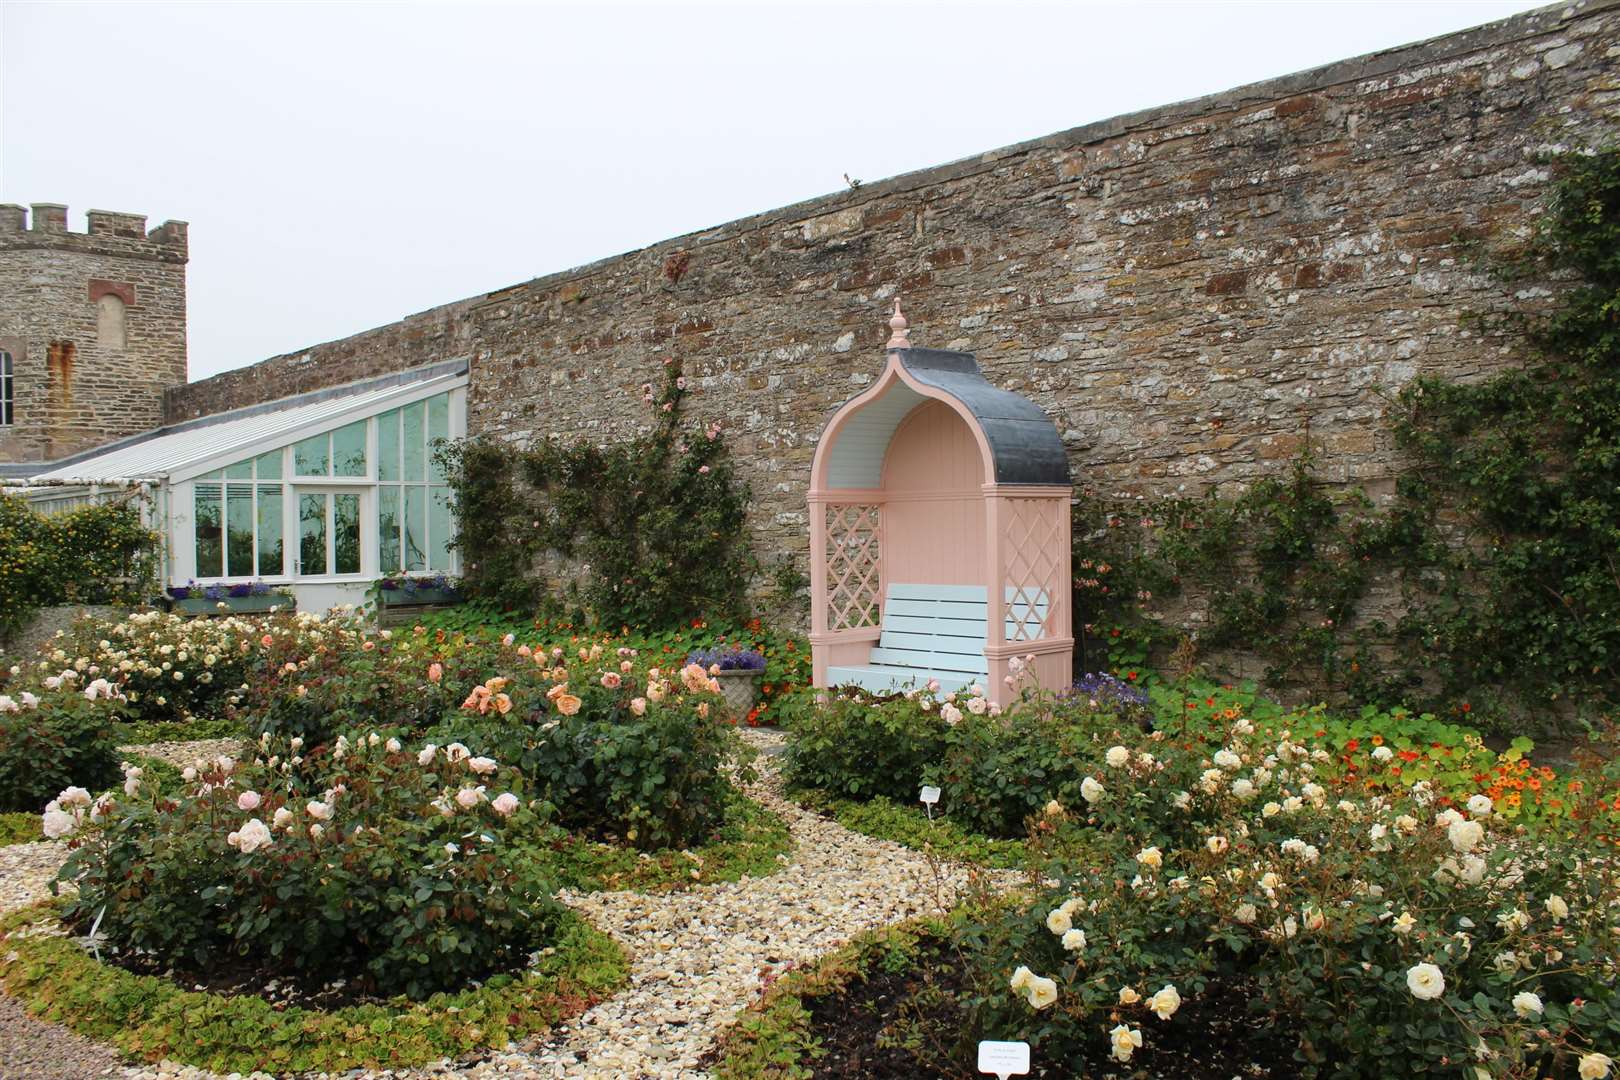 A view of the shell garden and the glasshouse at the Castle of Mey which has proved very popular with visitors.